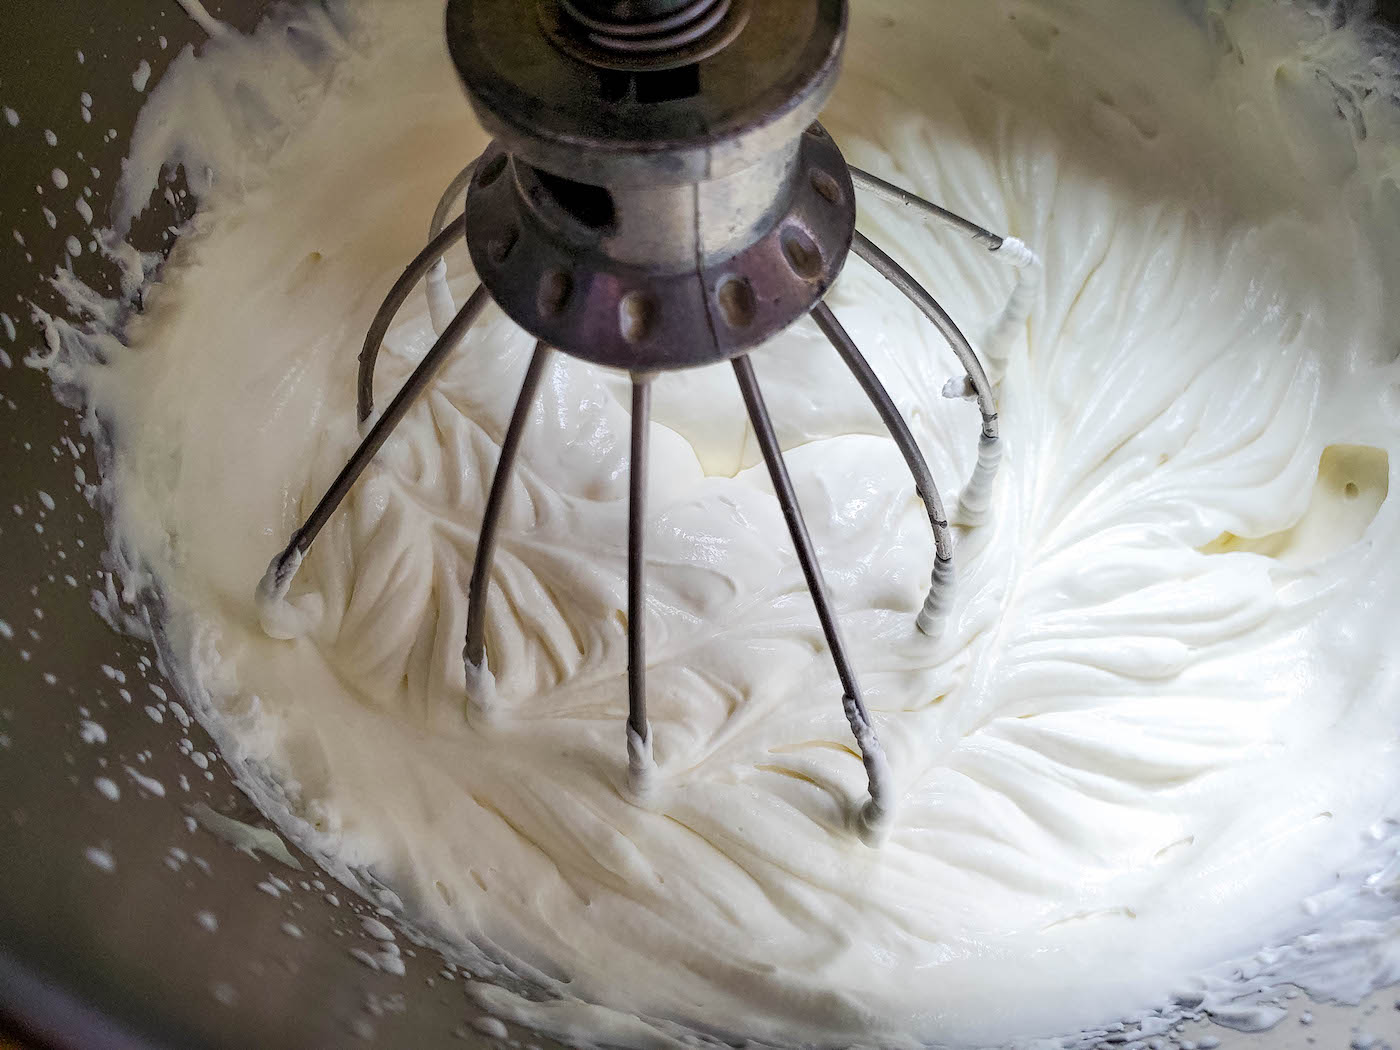 Beating the condensed milk and whipping cream mixture